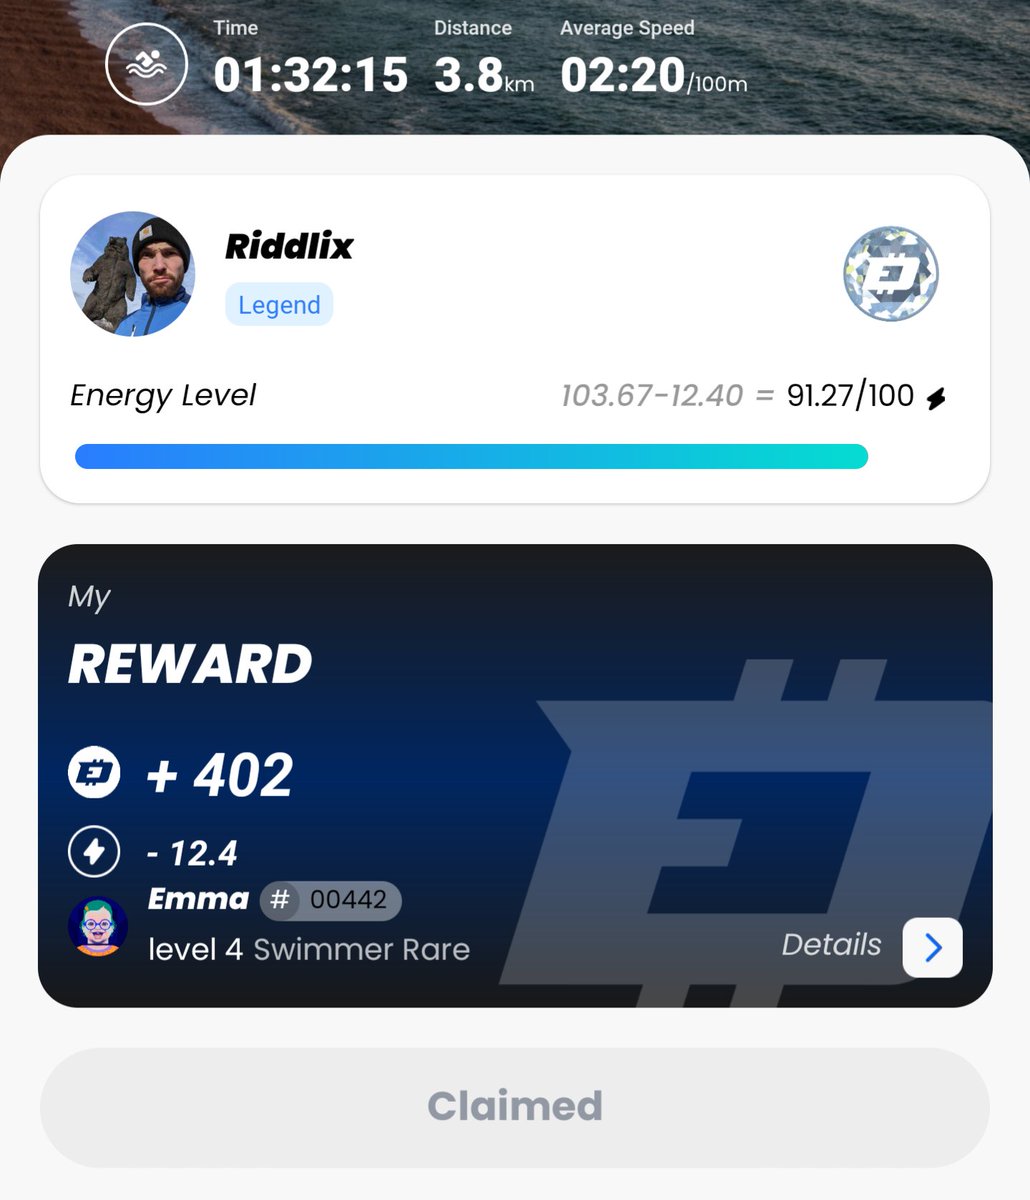 That's how I like to spend my morning. Workout and get rewarded with $DEFIT worth 50USD 🤯 
@ataraxia360 is right when he says, 'Sport has value'

@DEFITofficial #Defit #move2earn